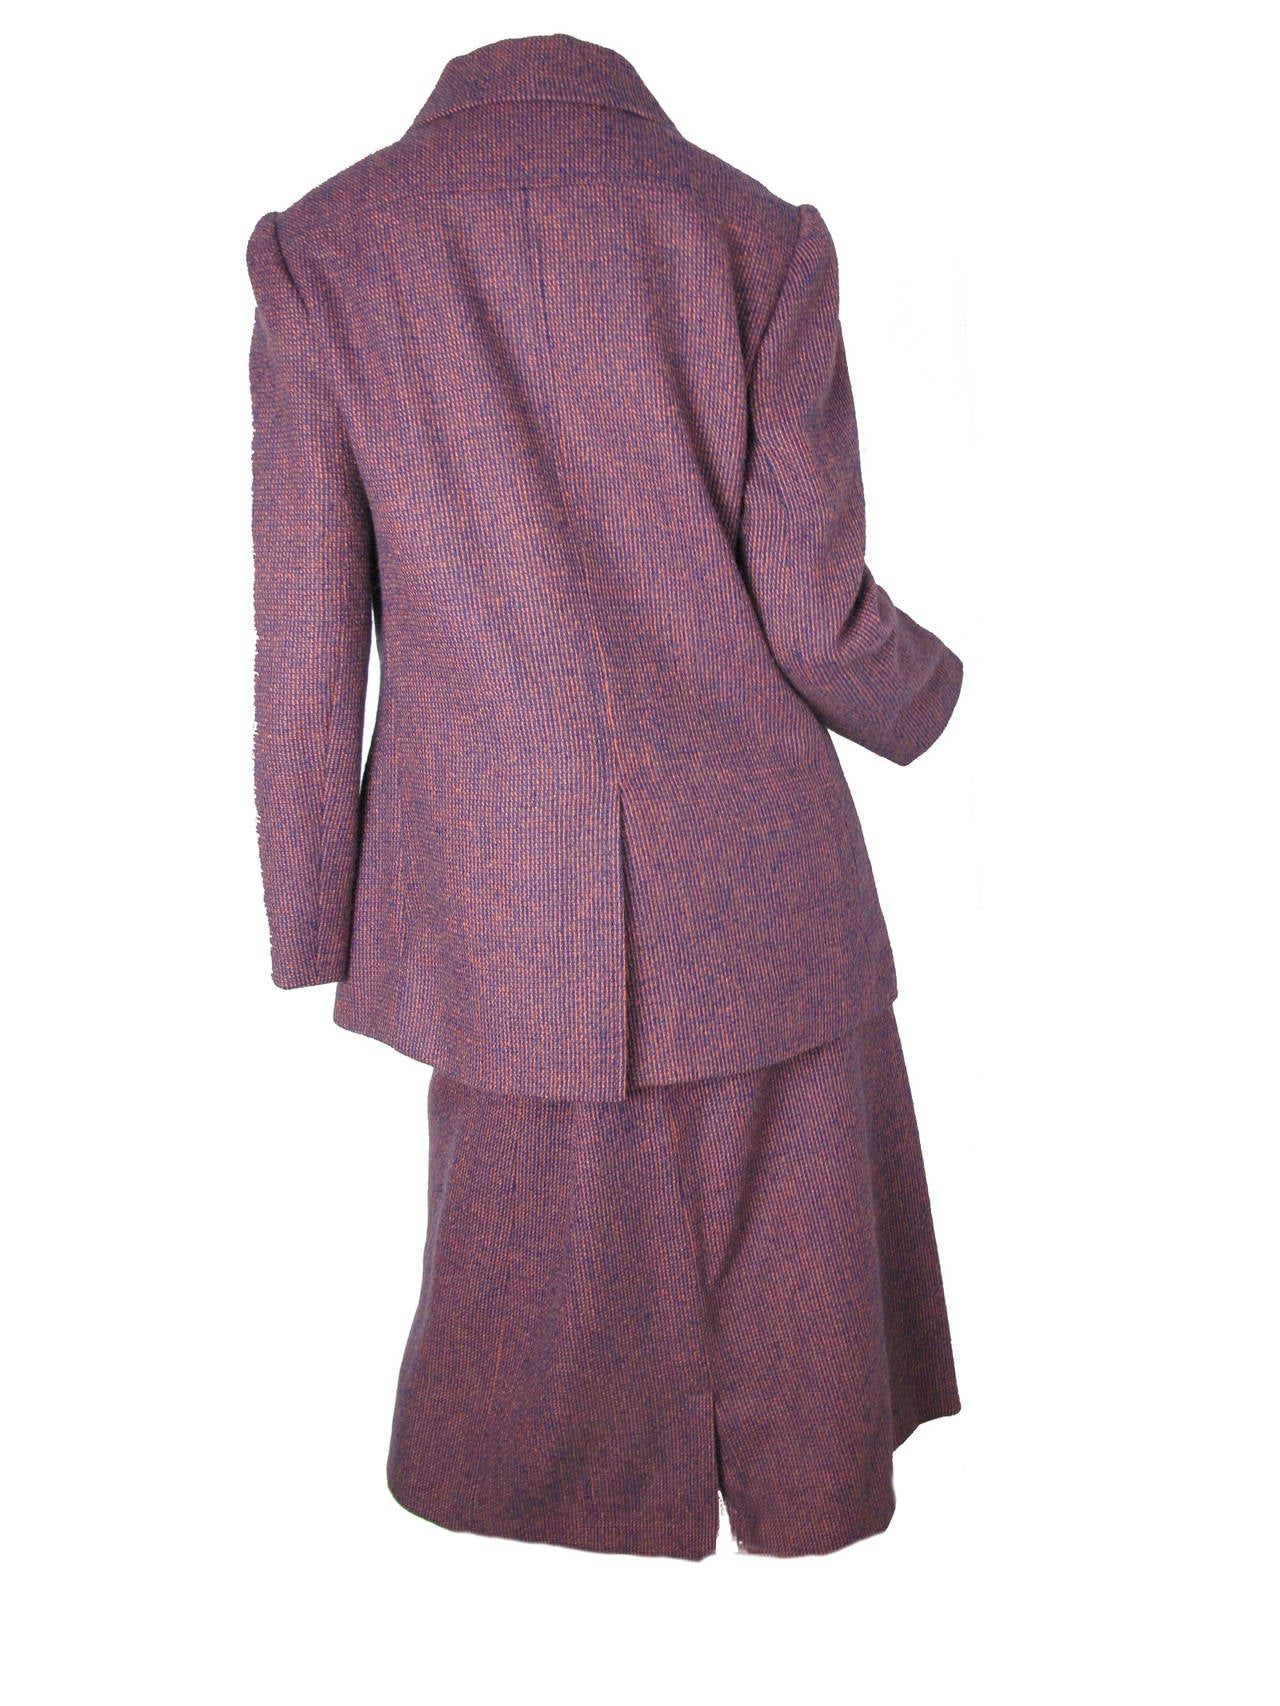 Christian Dior Numbered Suit, 1960s  1